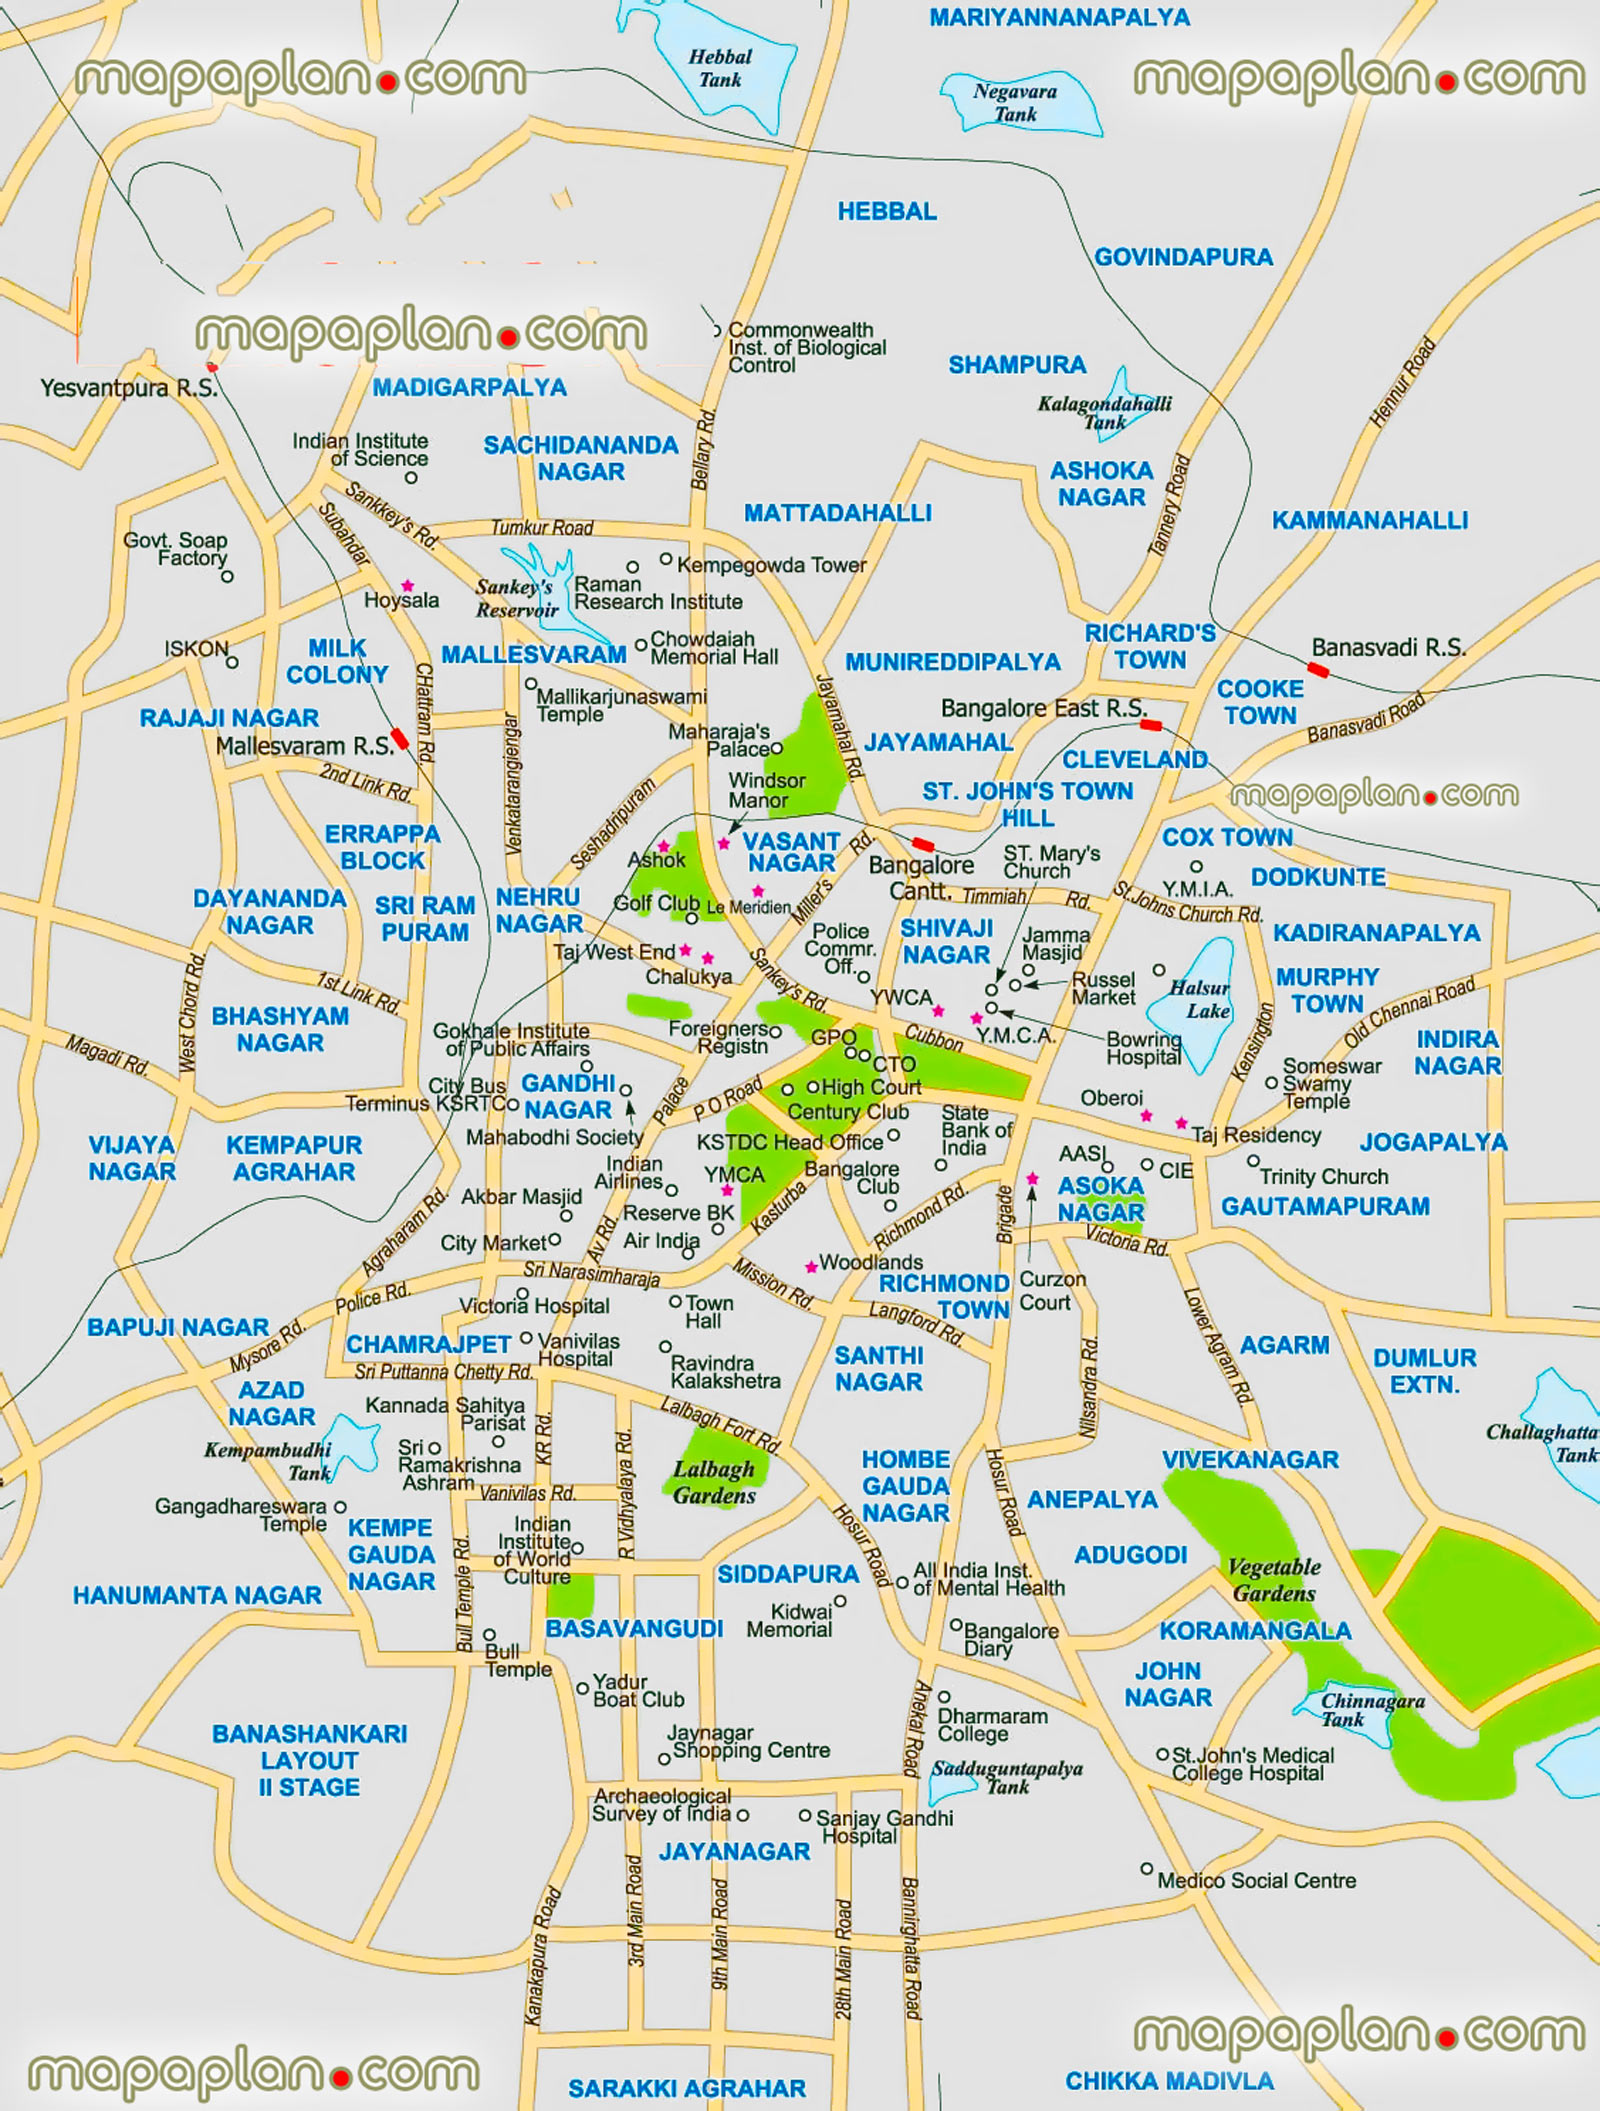 bengaluru printable detailed interactive virtual city centre downloadable tourist guide visitors english simple outline neighborhoods districts roads hotels must see places free download layout plan offline travel places visit must see tourist attractions famous destinationss Bangalore Top tourist attractions map